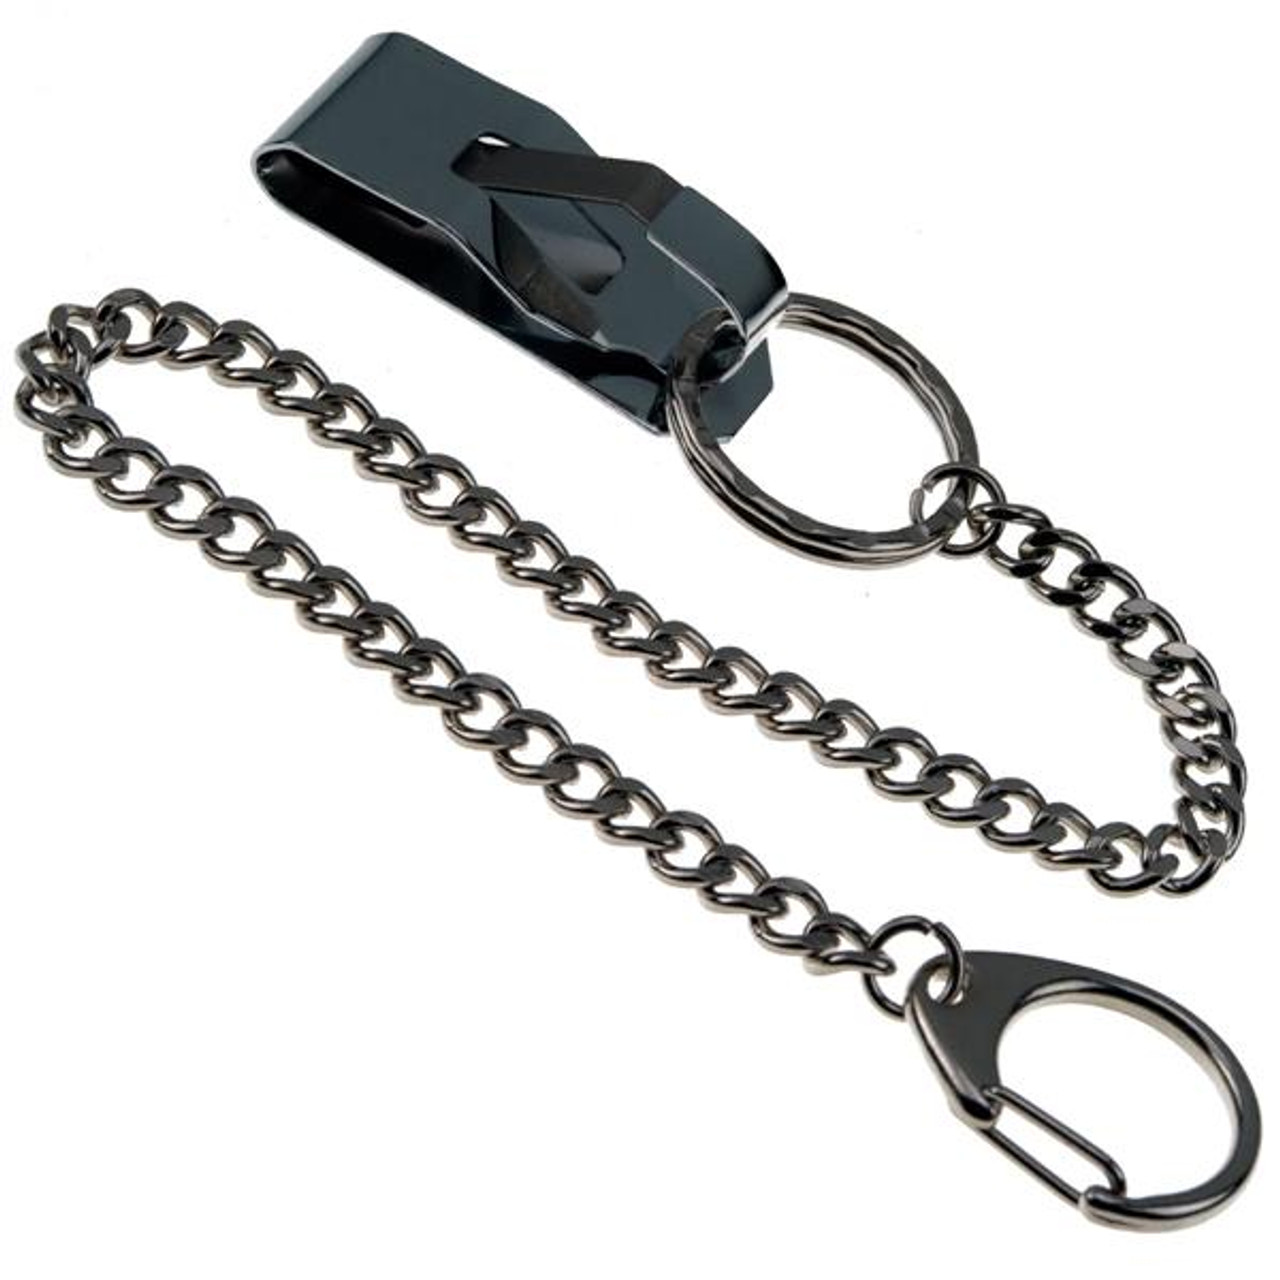 Shop for and Buy Key Support Belt Key Holder Clip On with Chain at